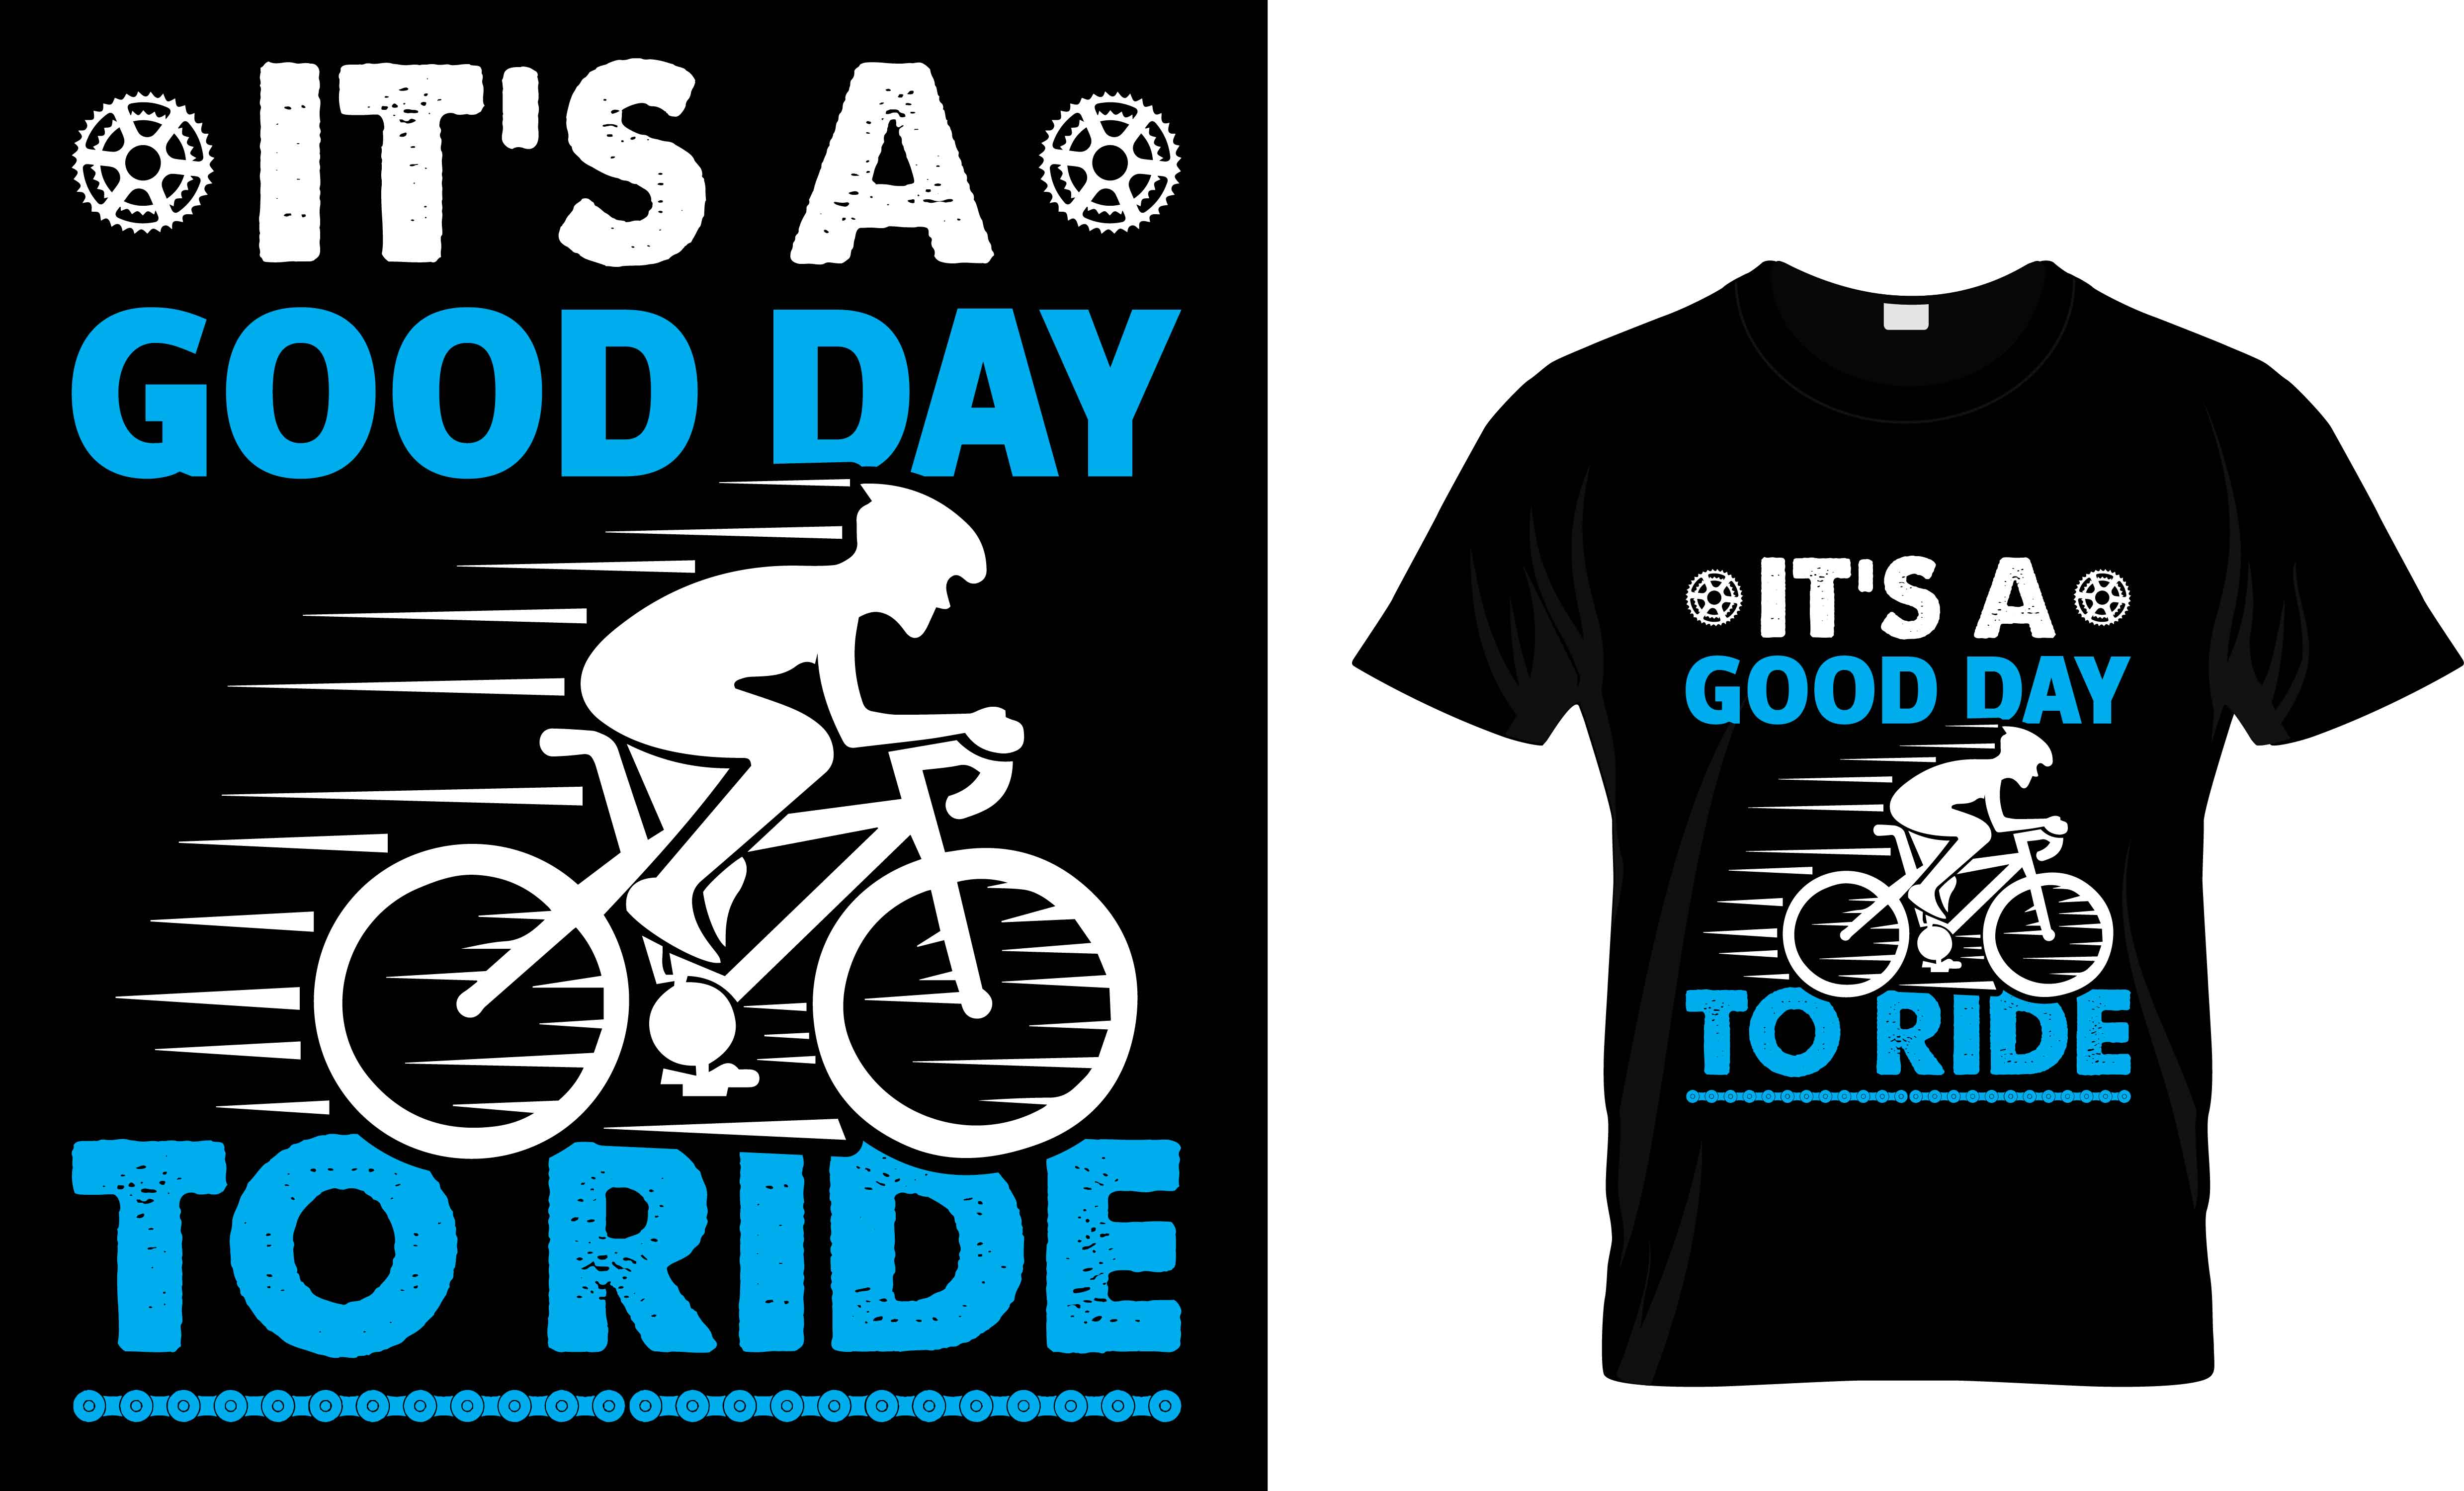 Classic t-shirt for cycling.